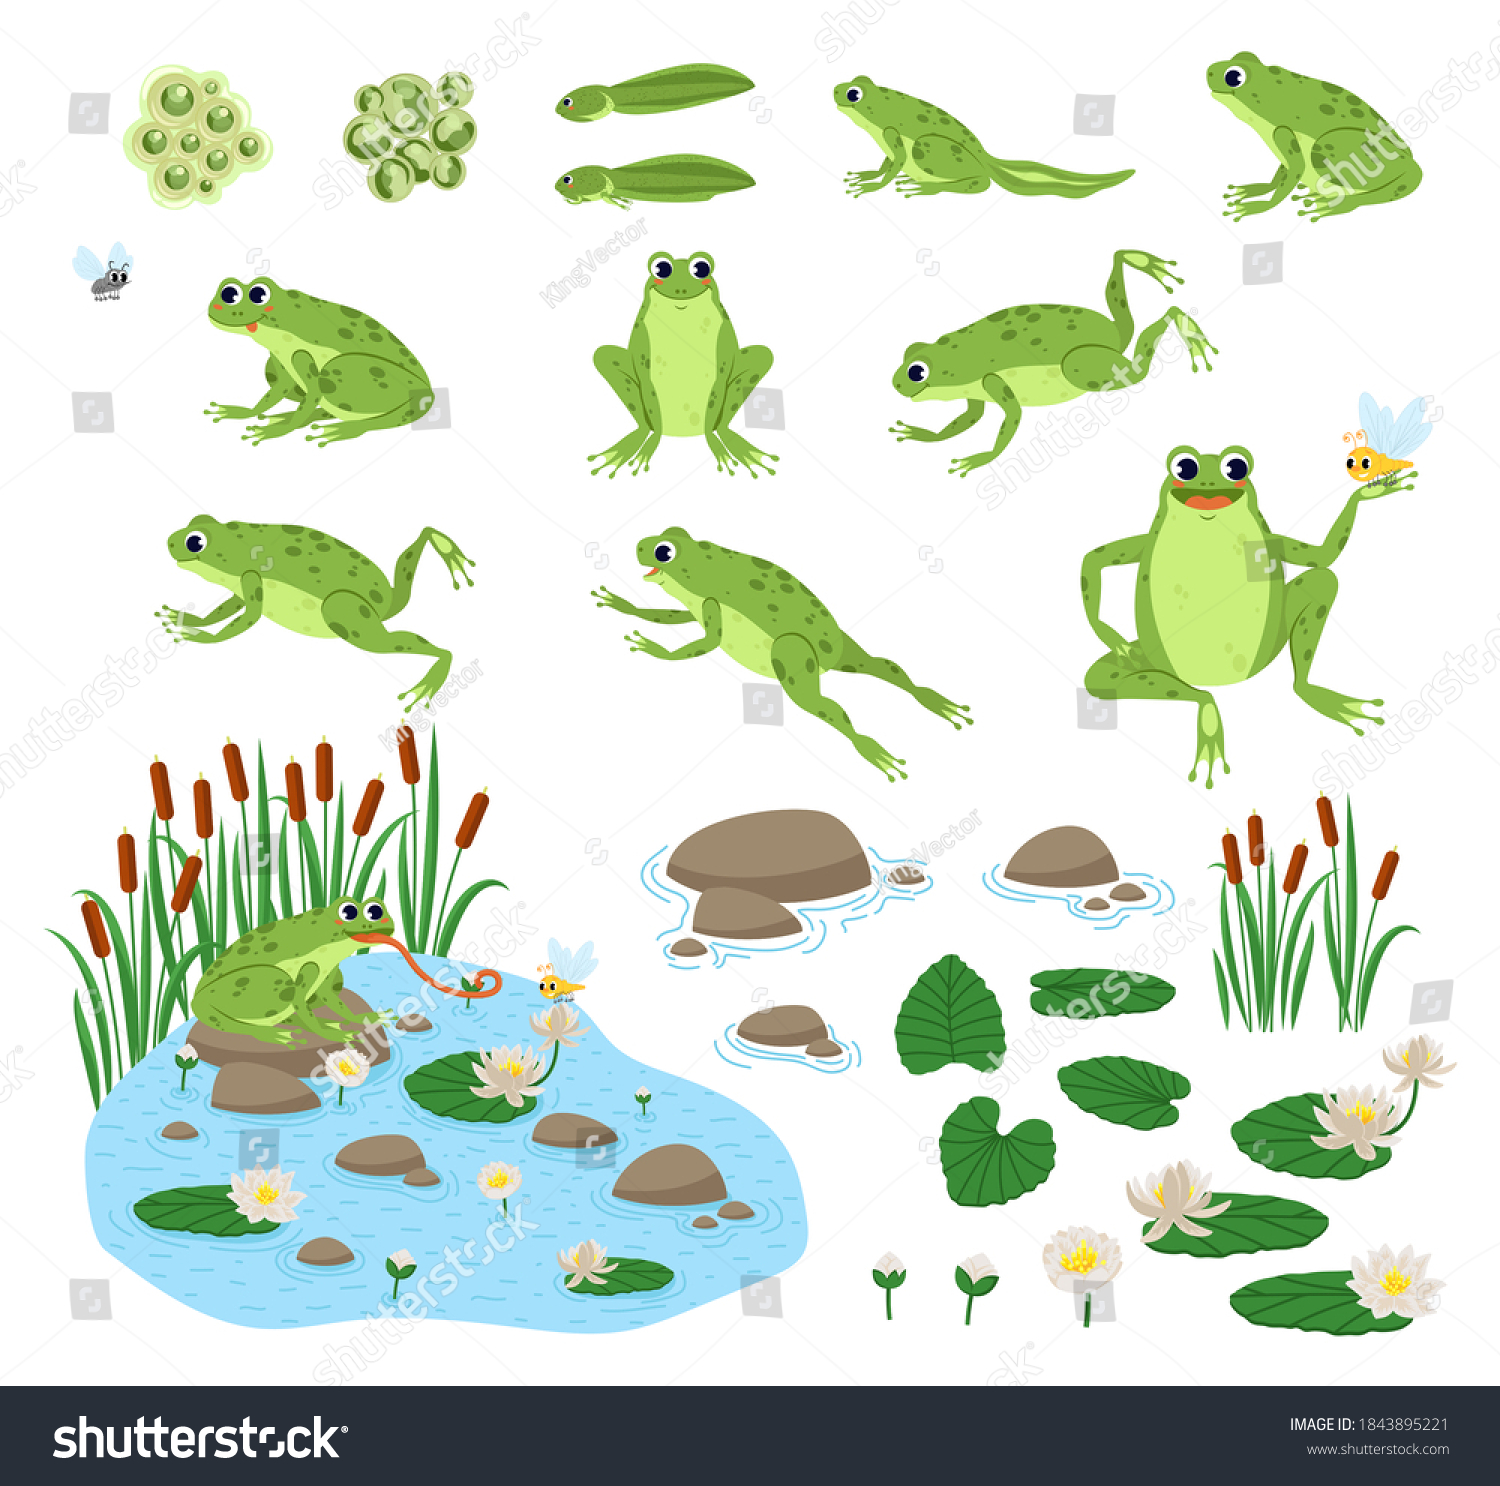 SVG of Set of cartoon hungry frog sad, smile, resting and hunting. Happy frog sit and jump clip art, different pose, with pond, plants, dragonfly. svg